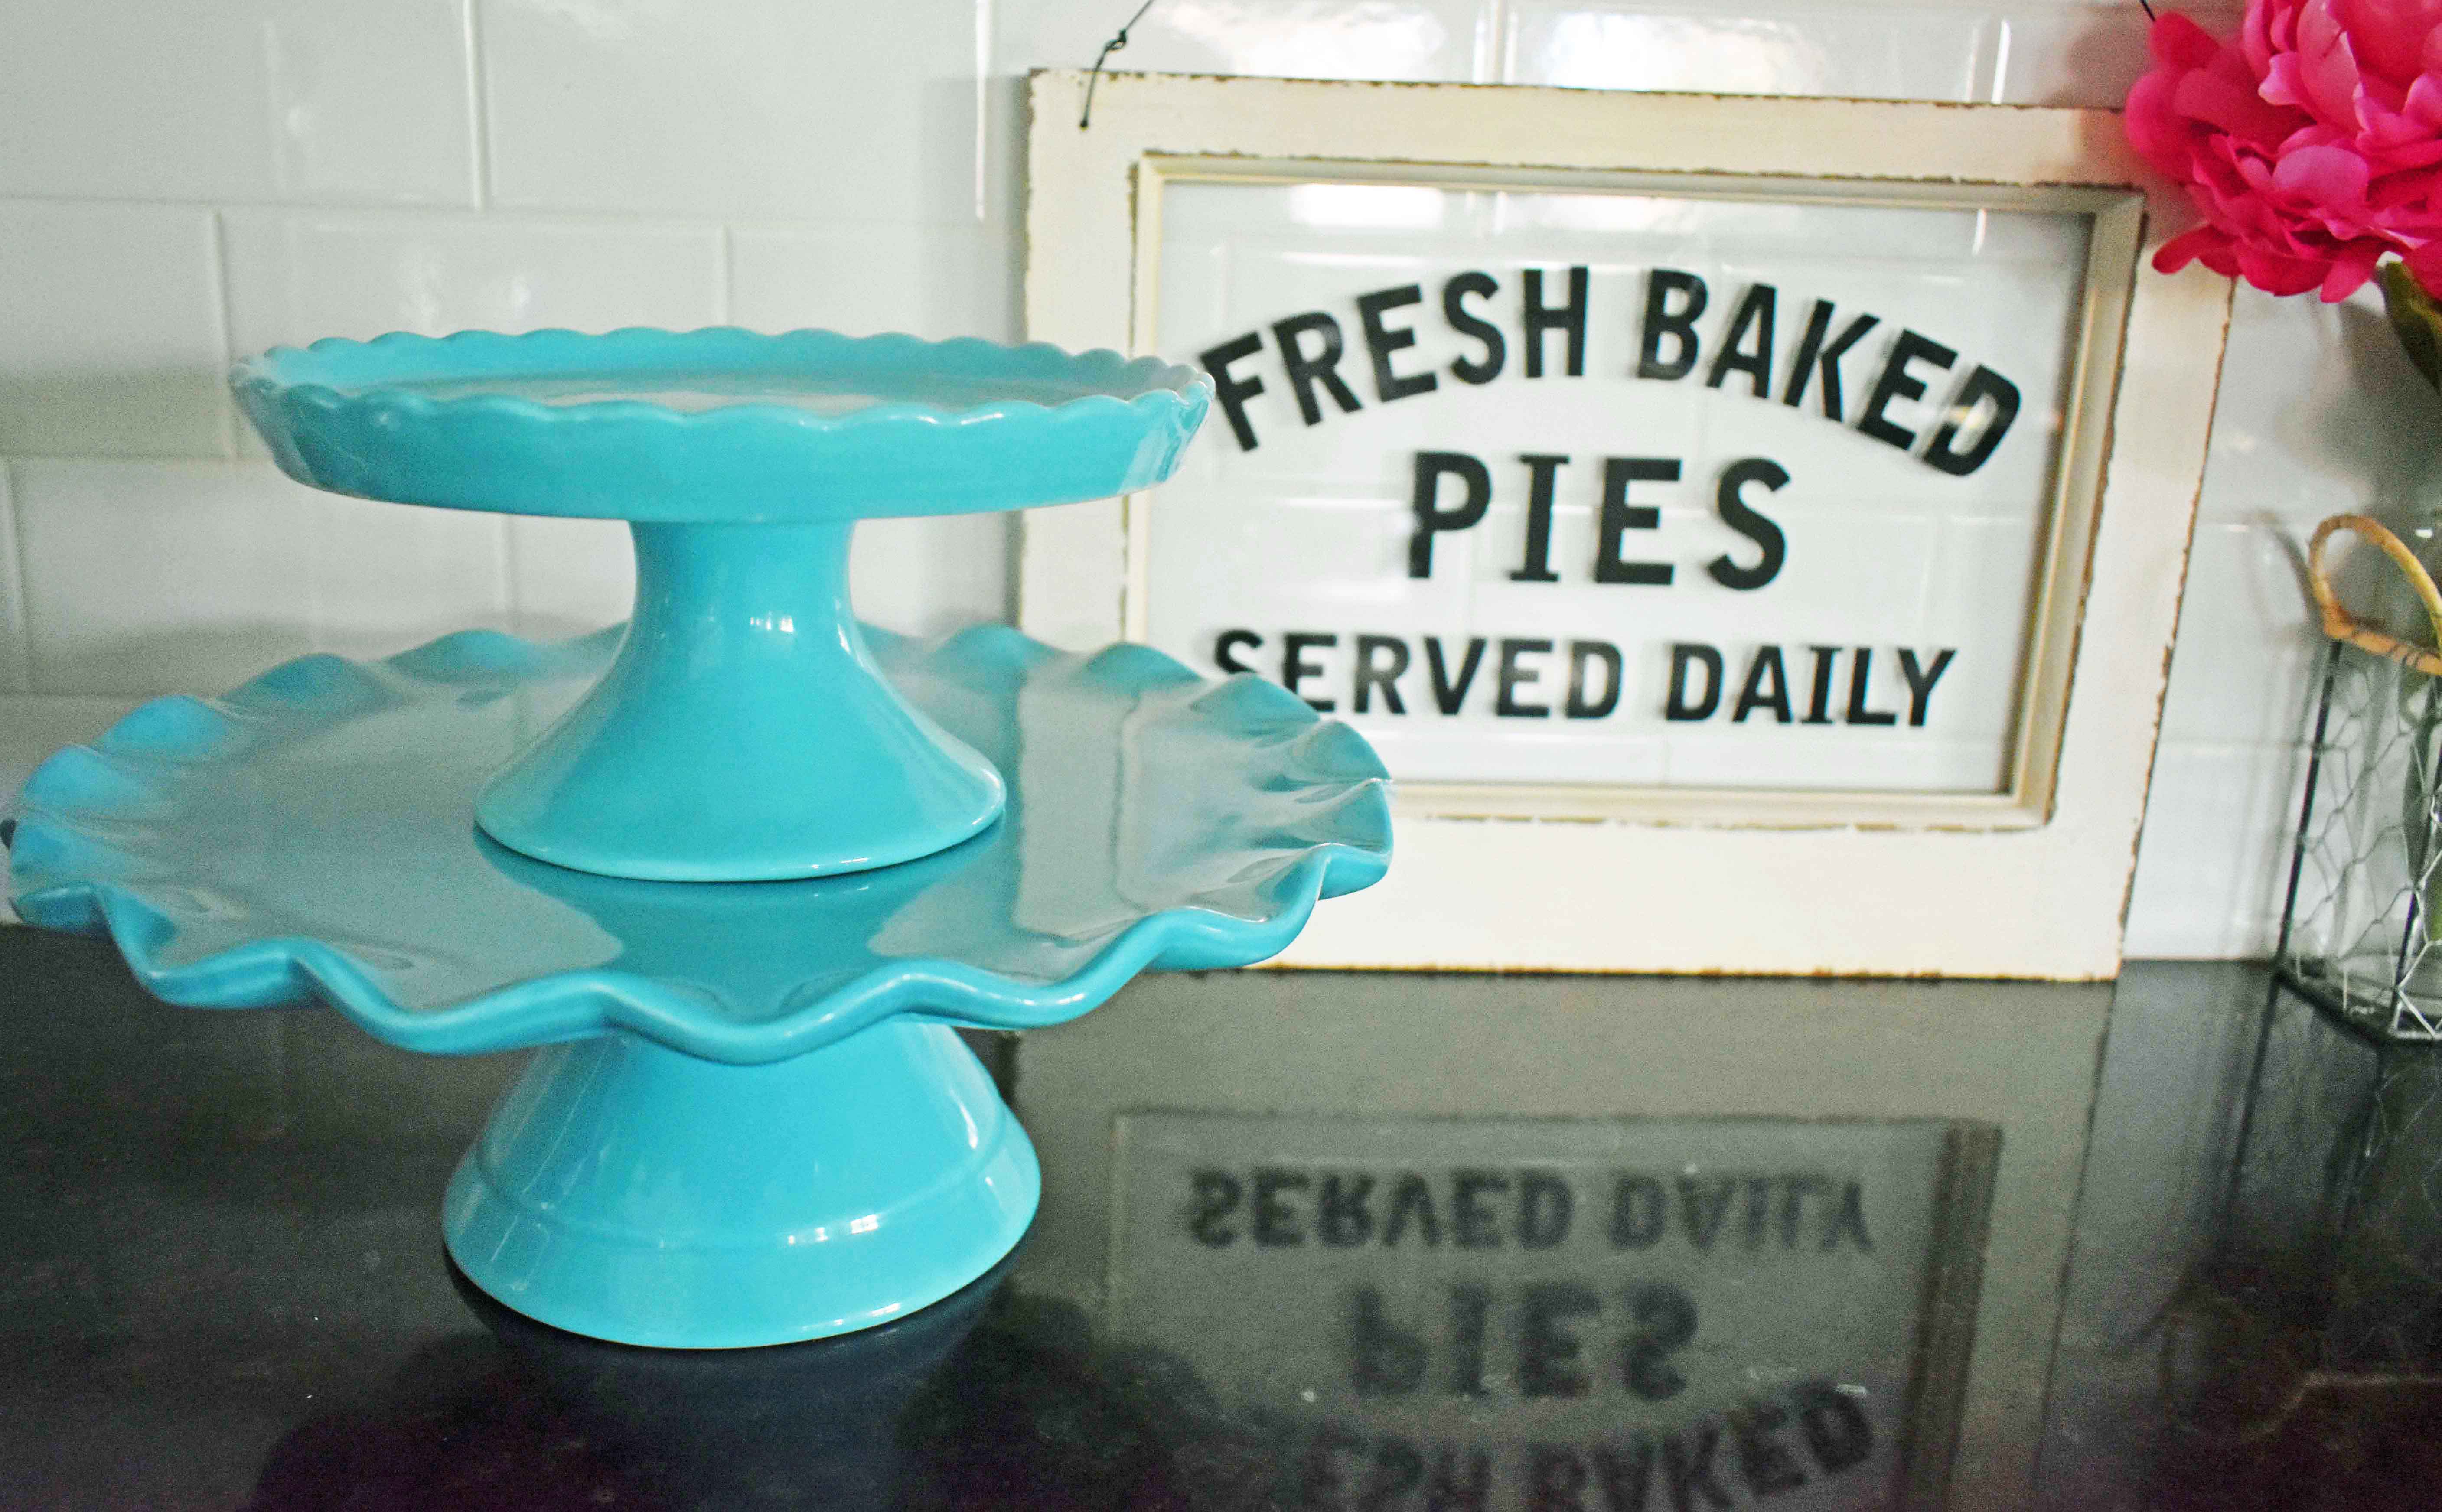 Spring Decoration Ideas. Bright and beautiful teal cake plates and fresh baked pies farmouse sign from World Market.